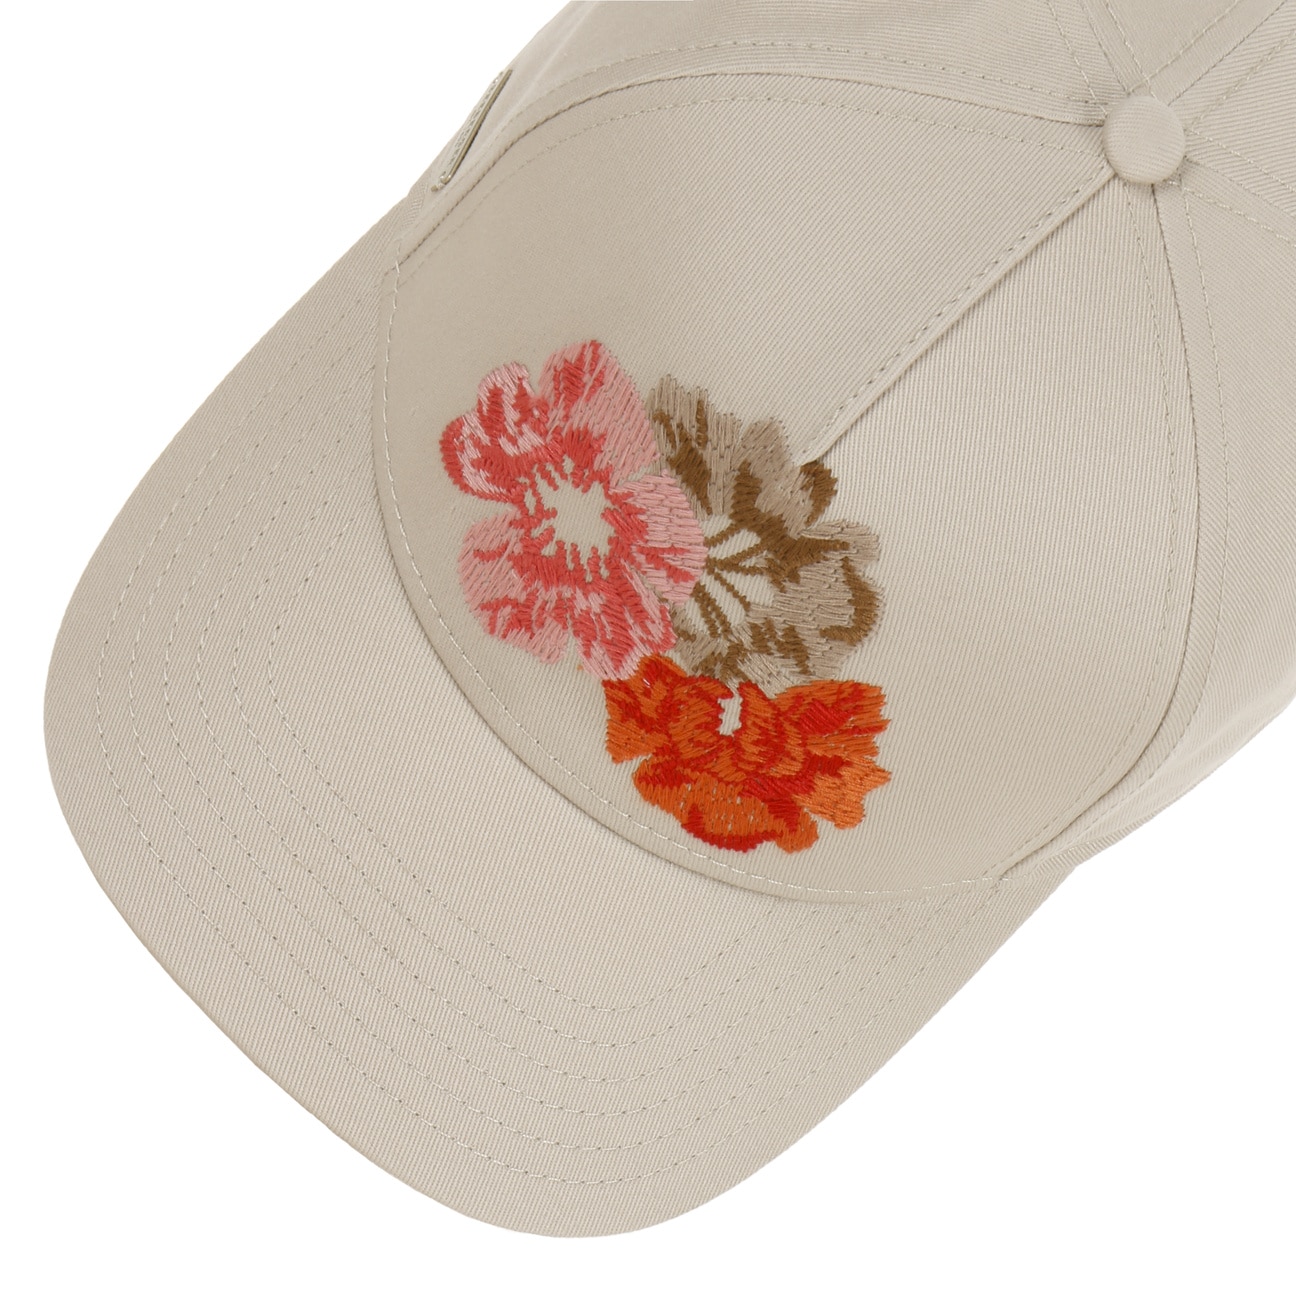 Flowers 29,95 Seeberger - Stitched by Cap €